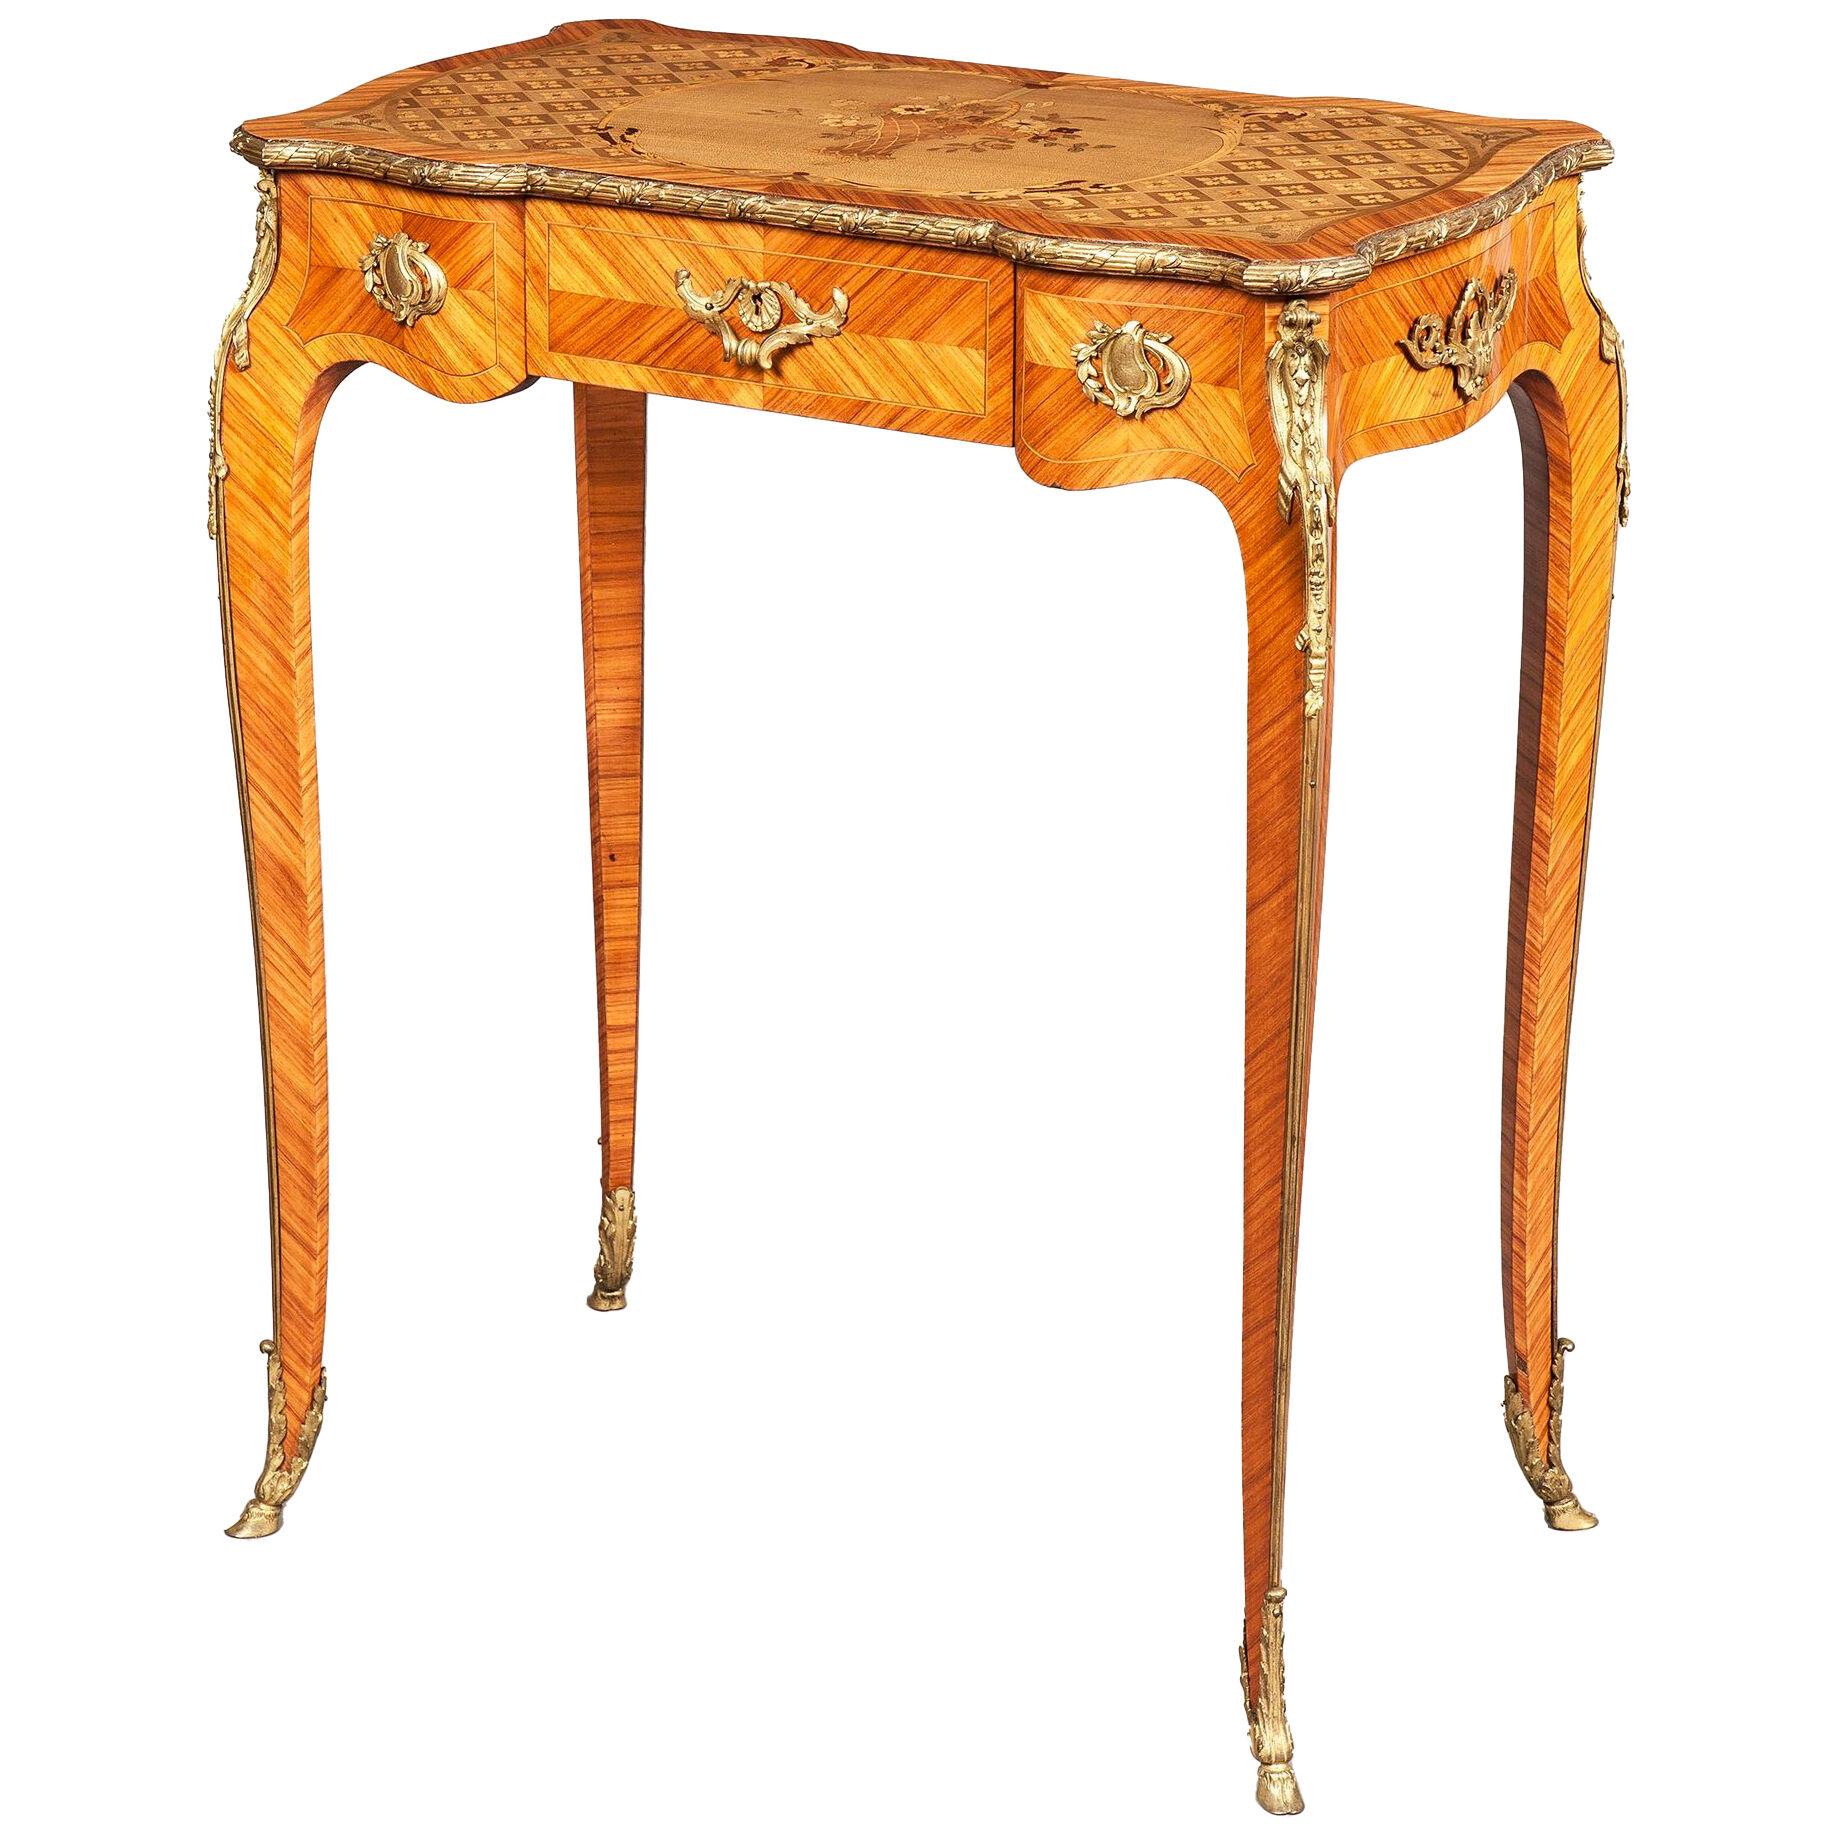 Kingwood and Marquetry-Inlaid Table in the Louis XV Manner